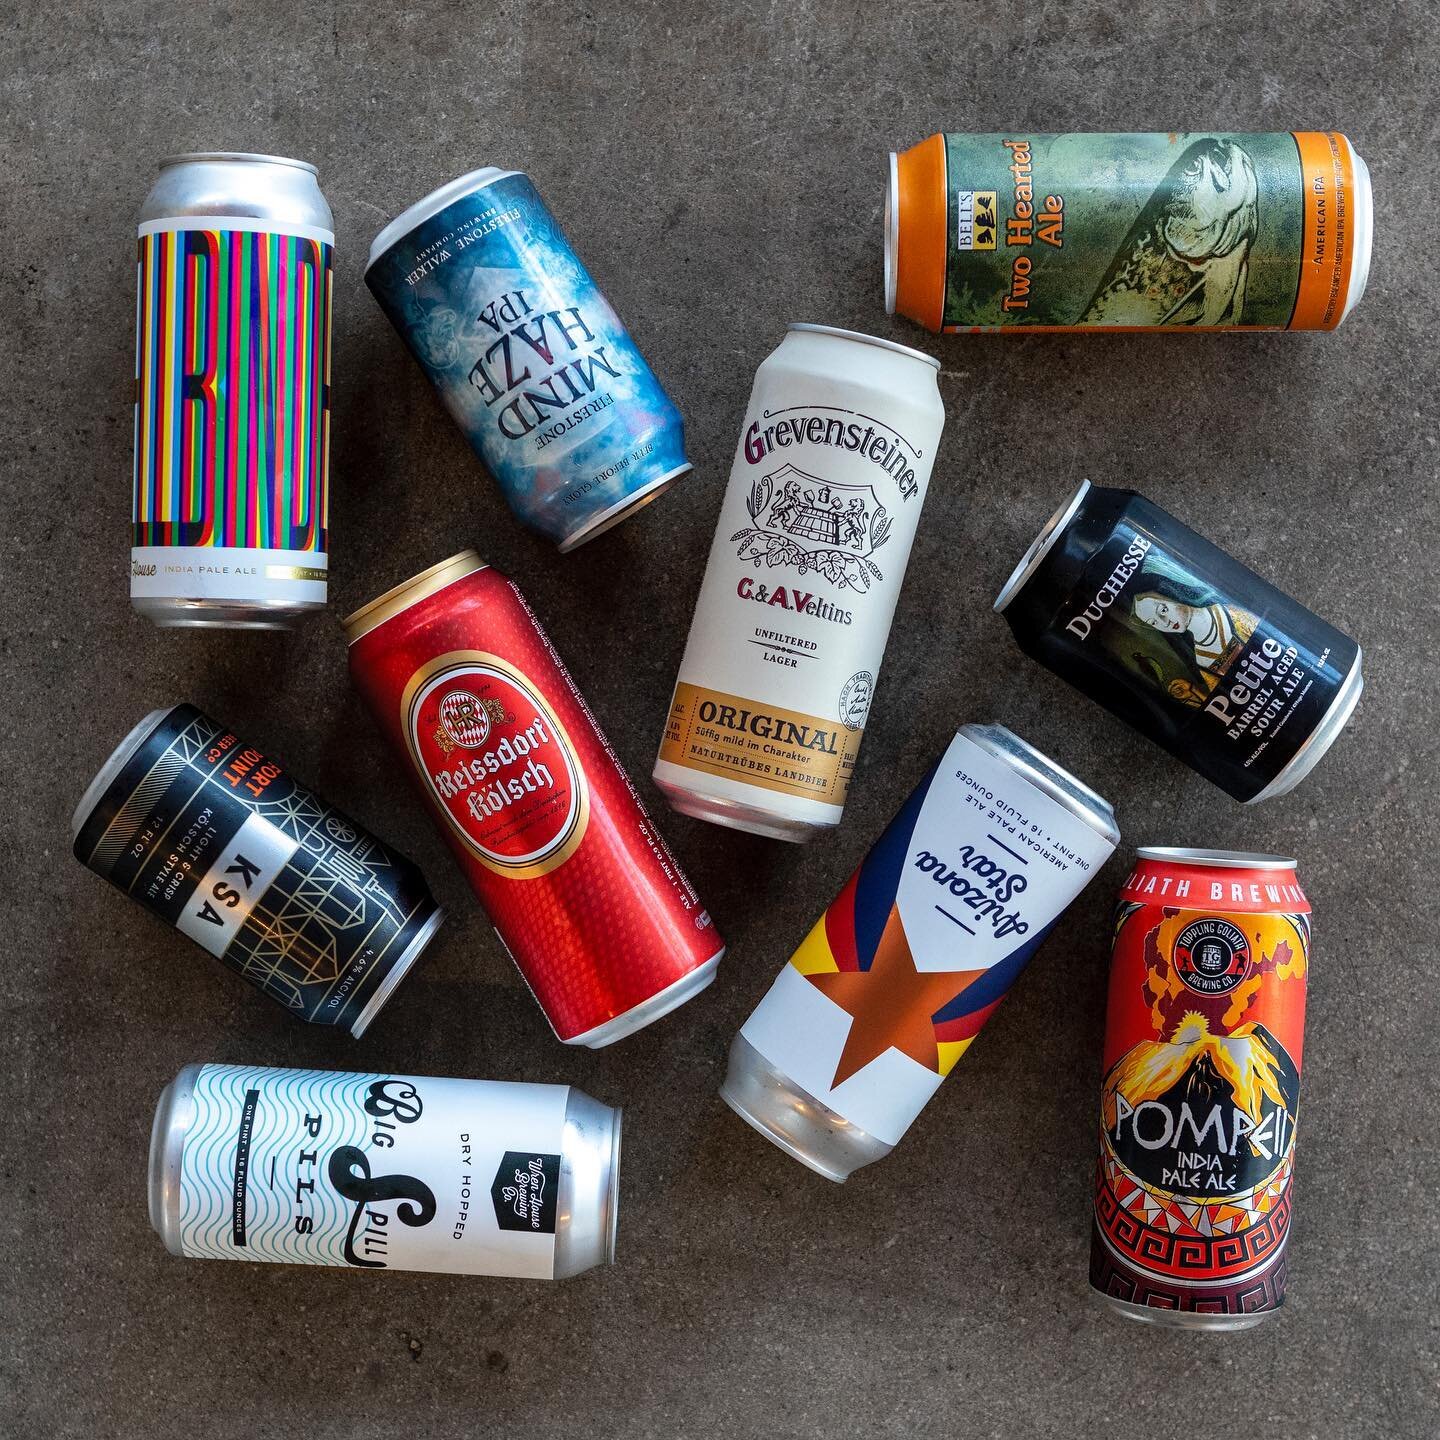 Happy Friday! Load up on your favorite beers to sip while you watch the monsoons roll through.